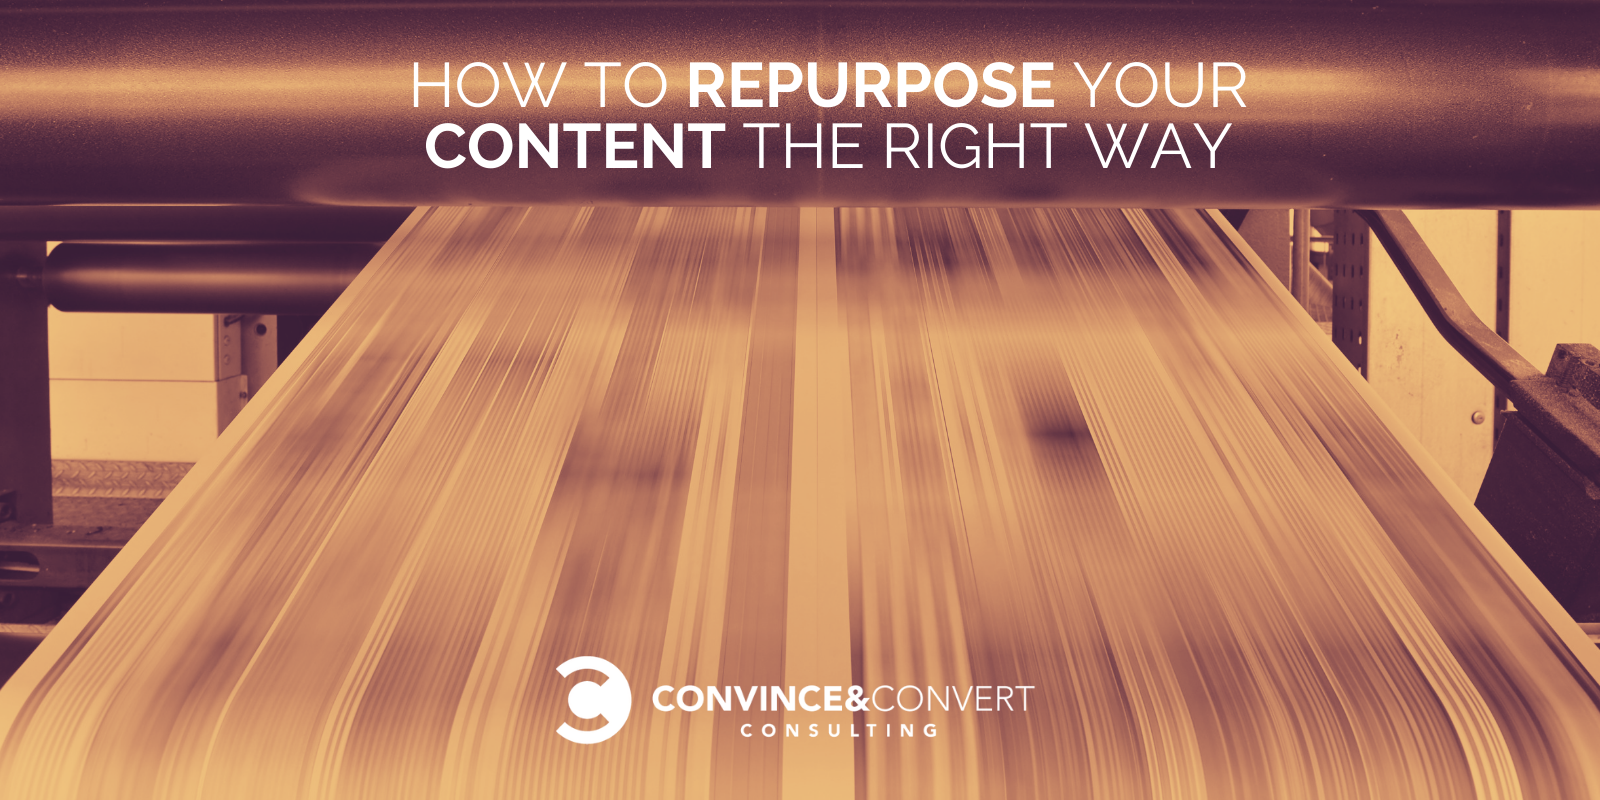 How to reuse your content